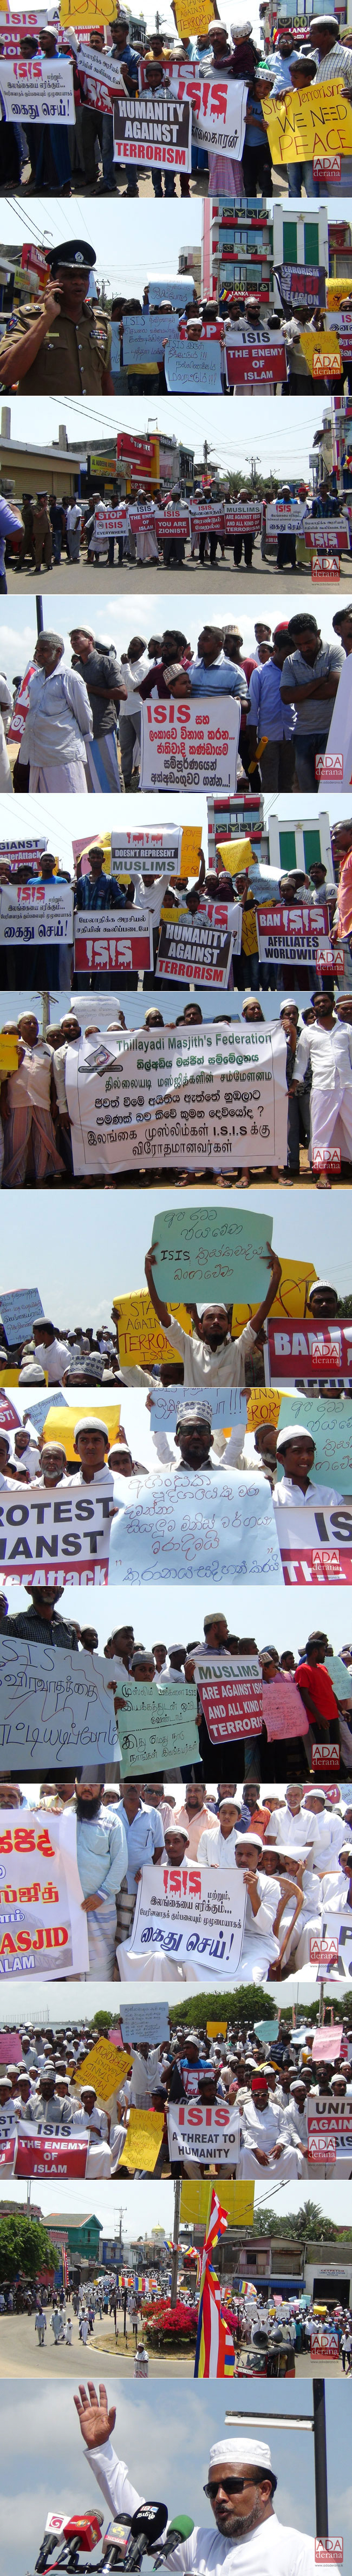 Muslims in Puttalam protest against IS...